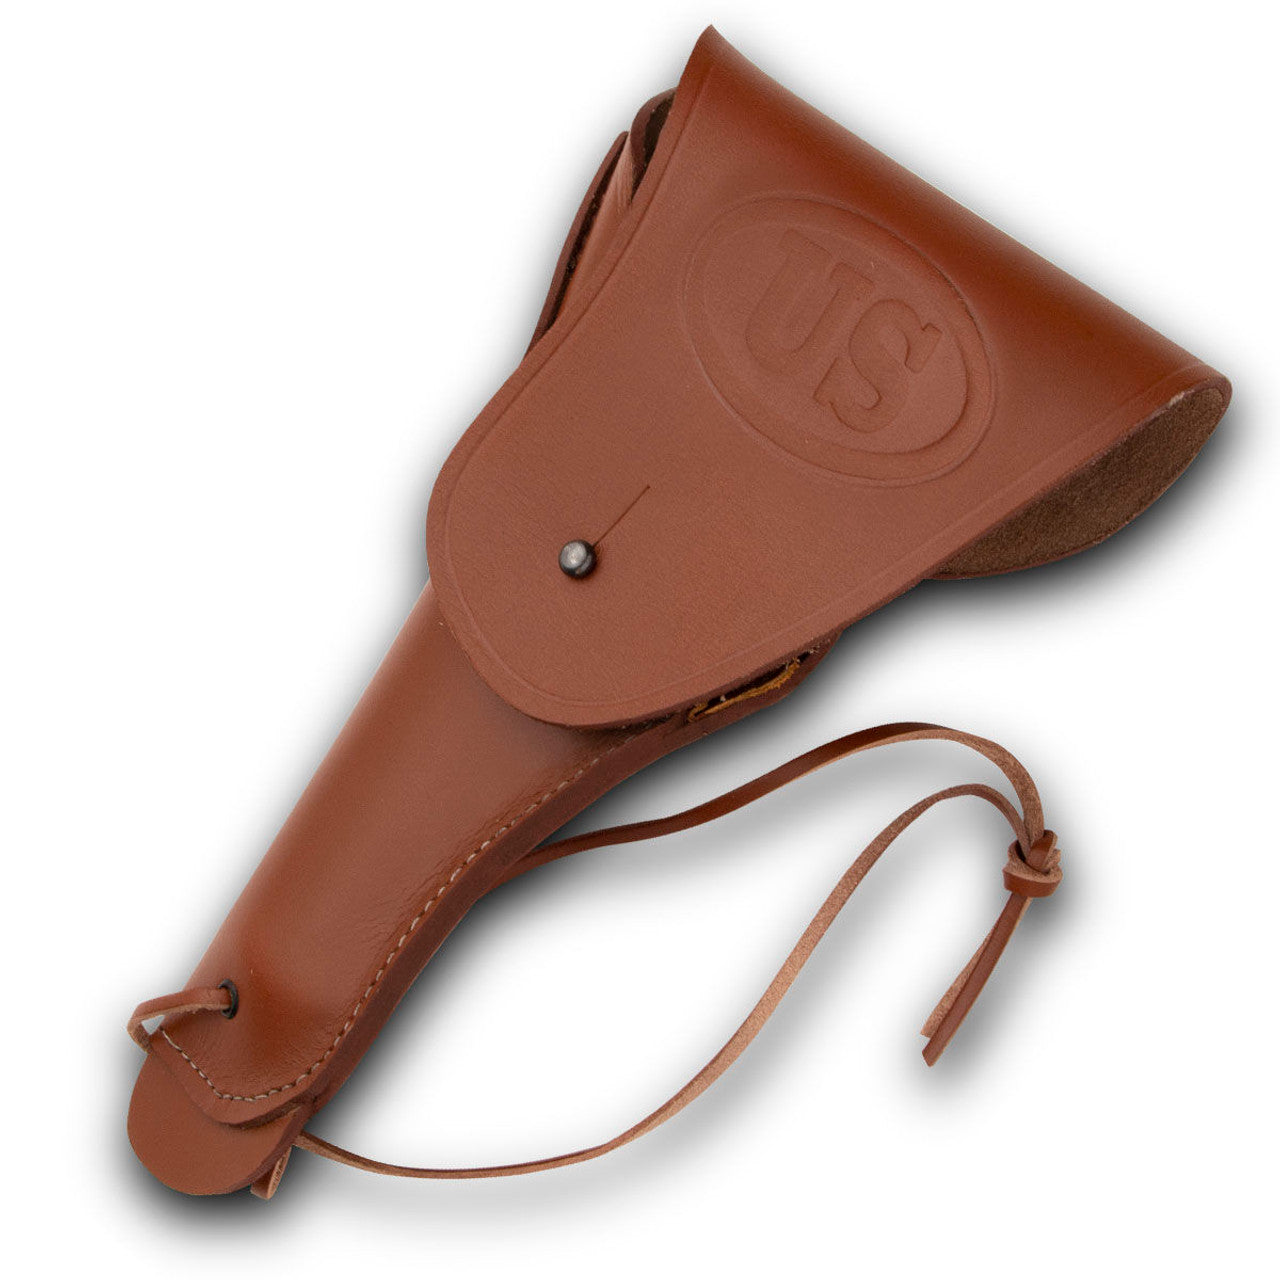 Leather 1911 Holster - U.S. Replica Left Hand